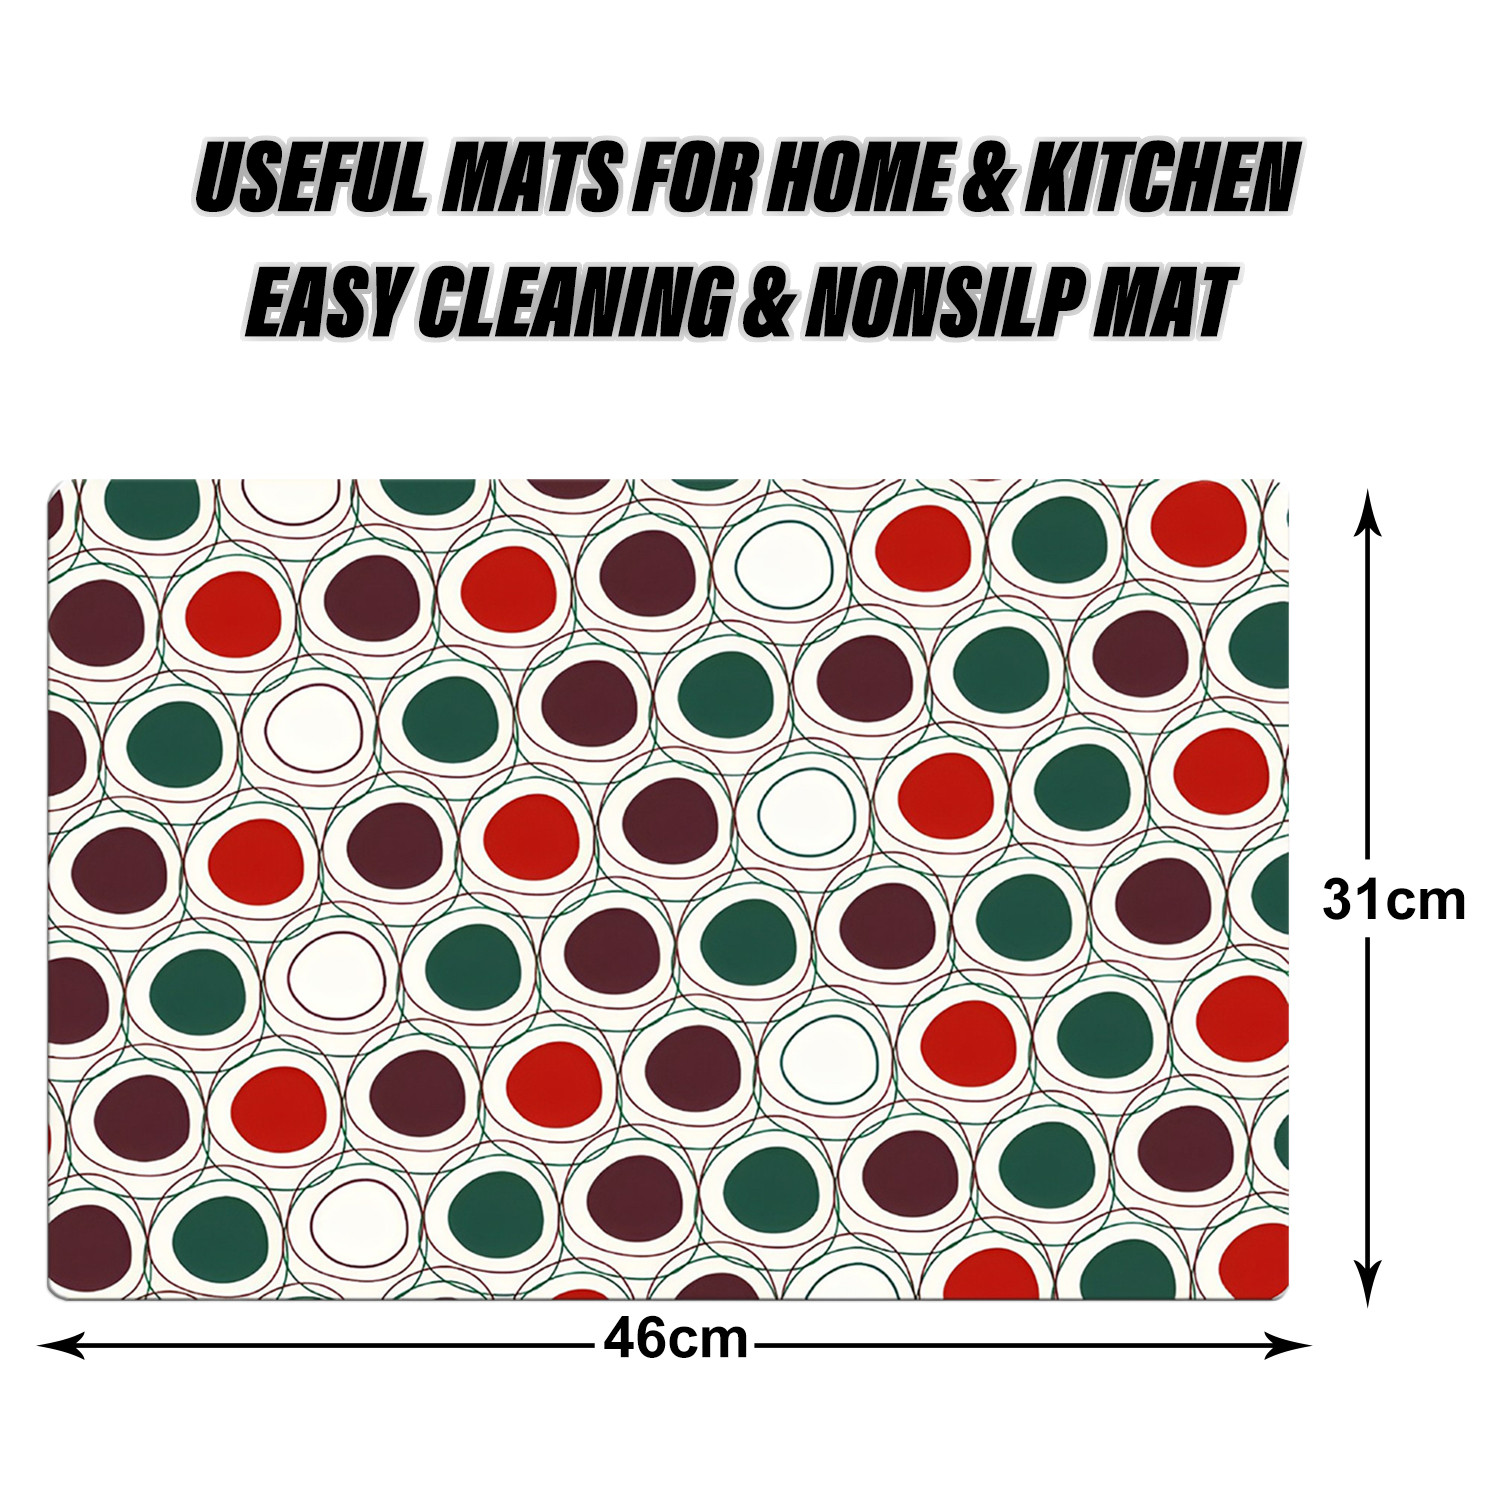 Kuber Industries Dining Table Mat | PVC Multi Dot Print | Table Mat | Placemats for Kitchen | Refrigerator Liners Mats | Shelf Liner Mat | Set of 6 | Multicolor